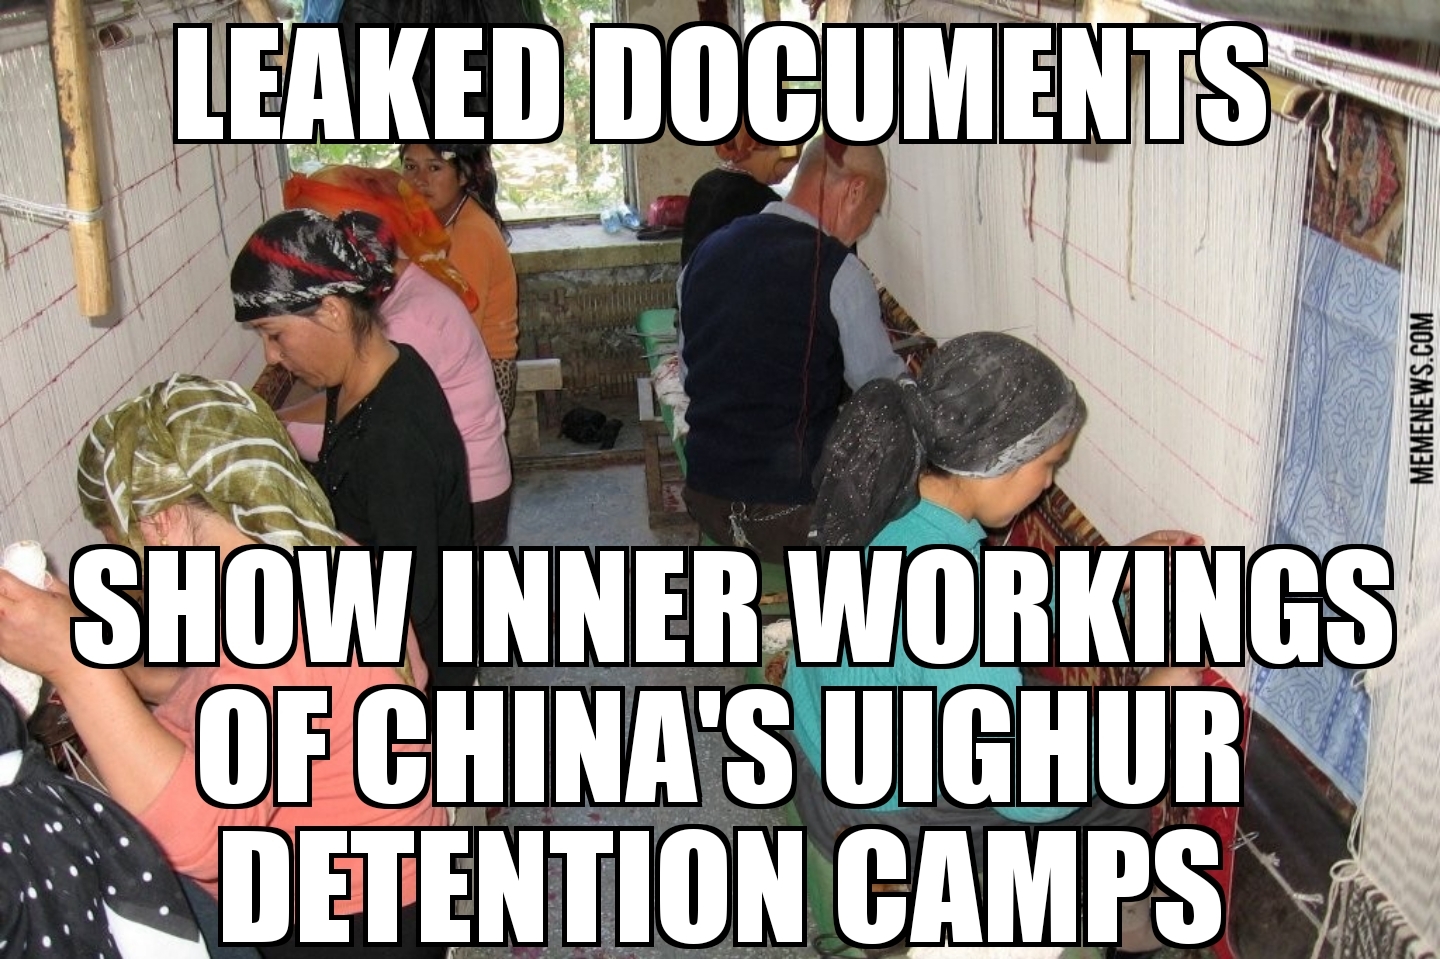 Leaks show inner workings of Uighur detention camps in China